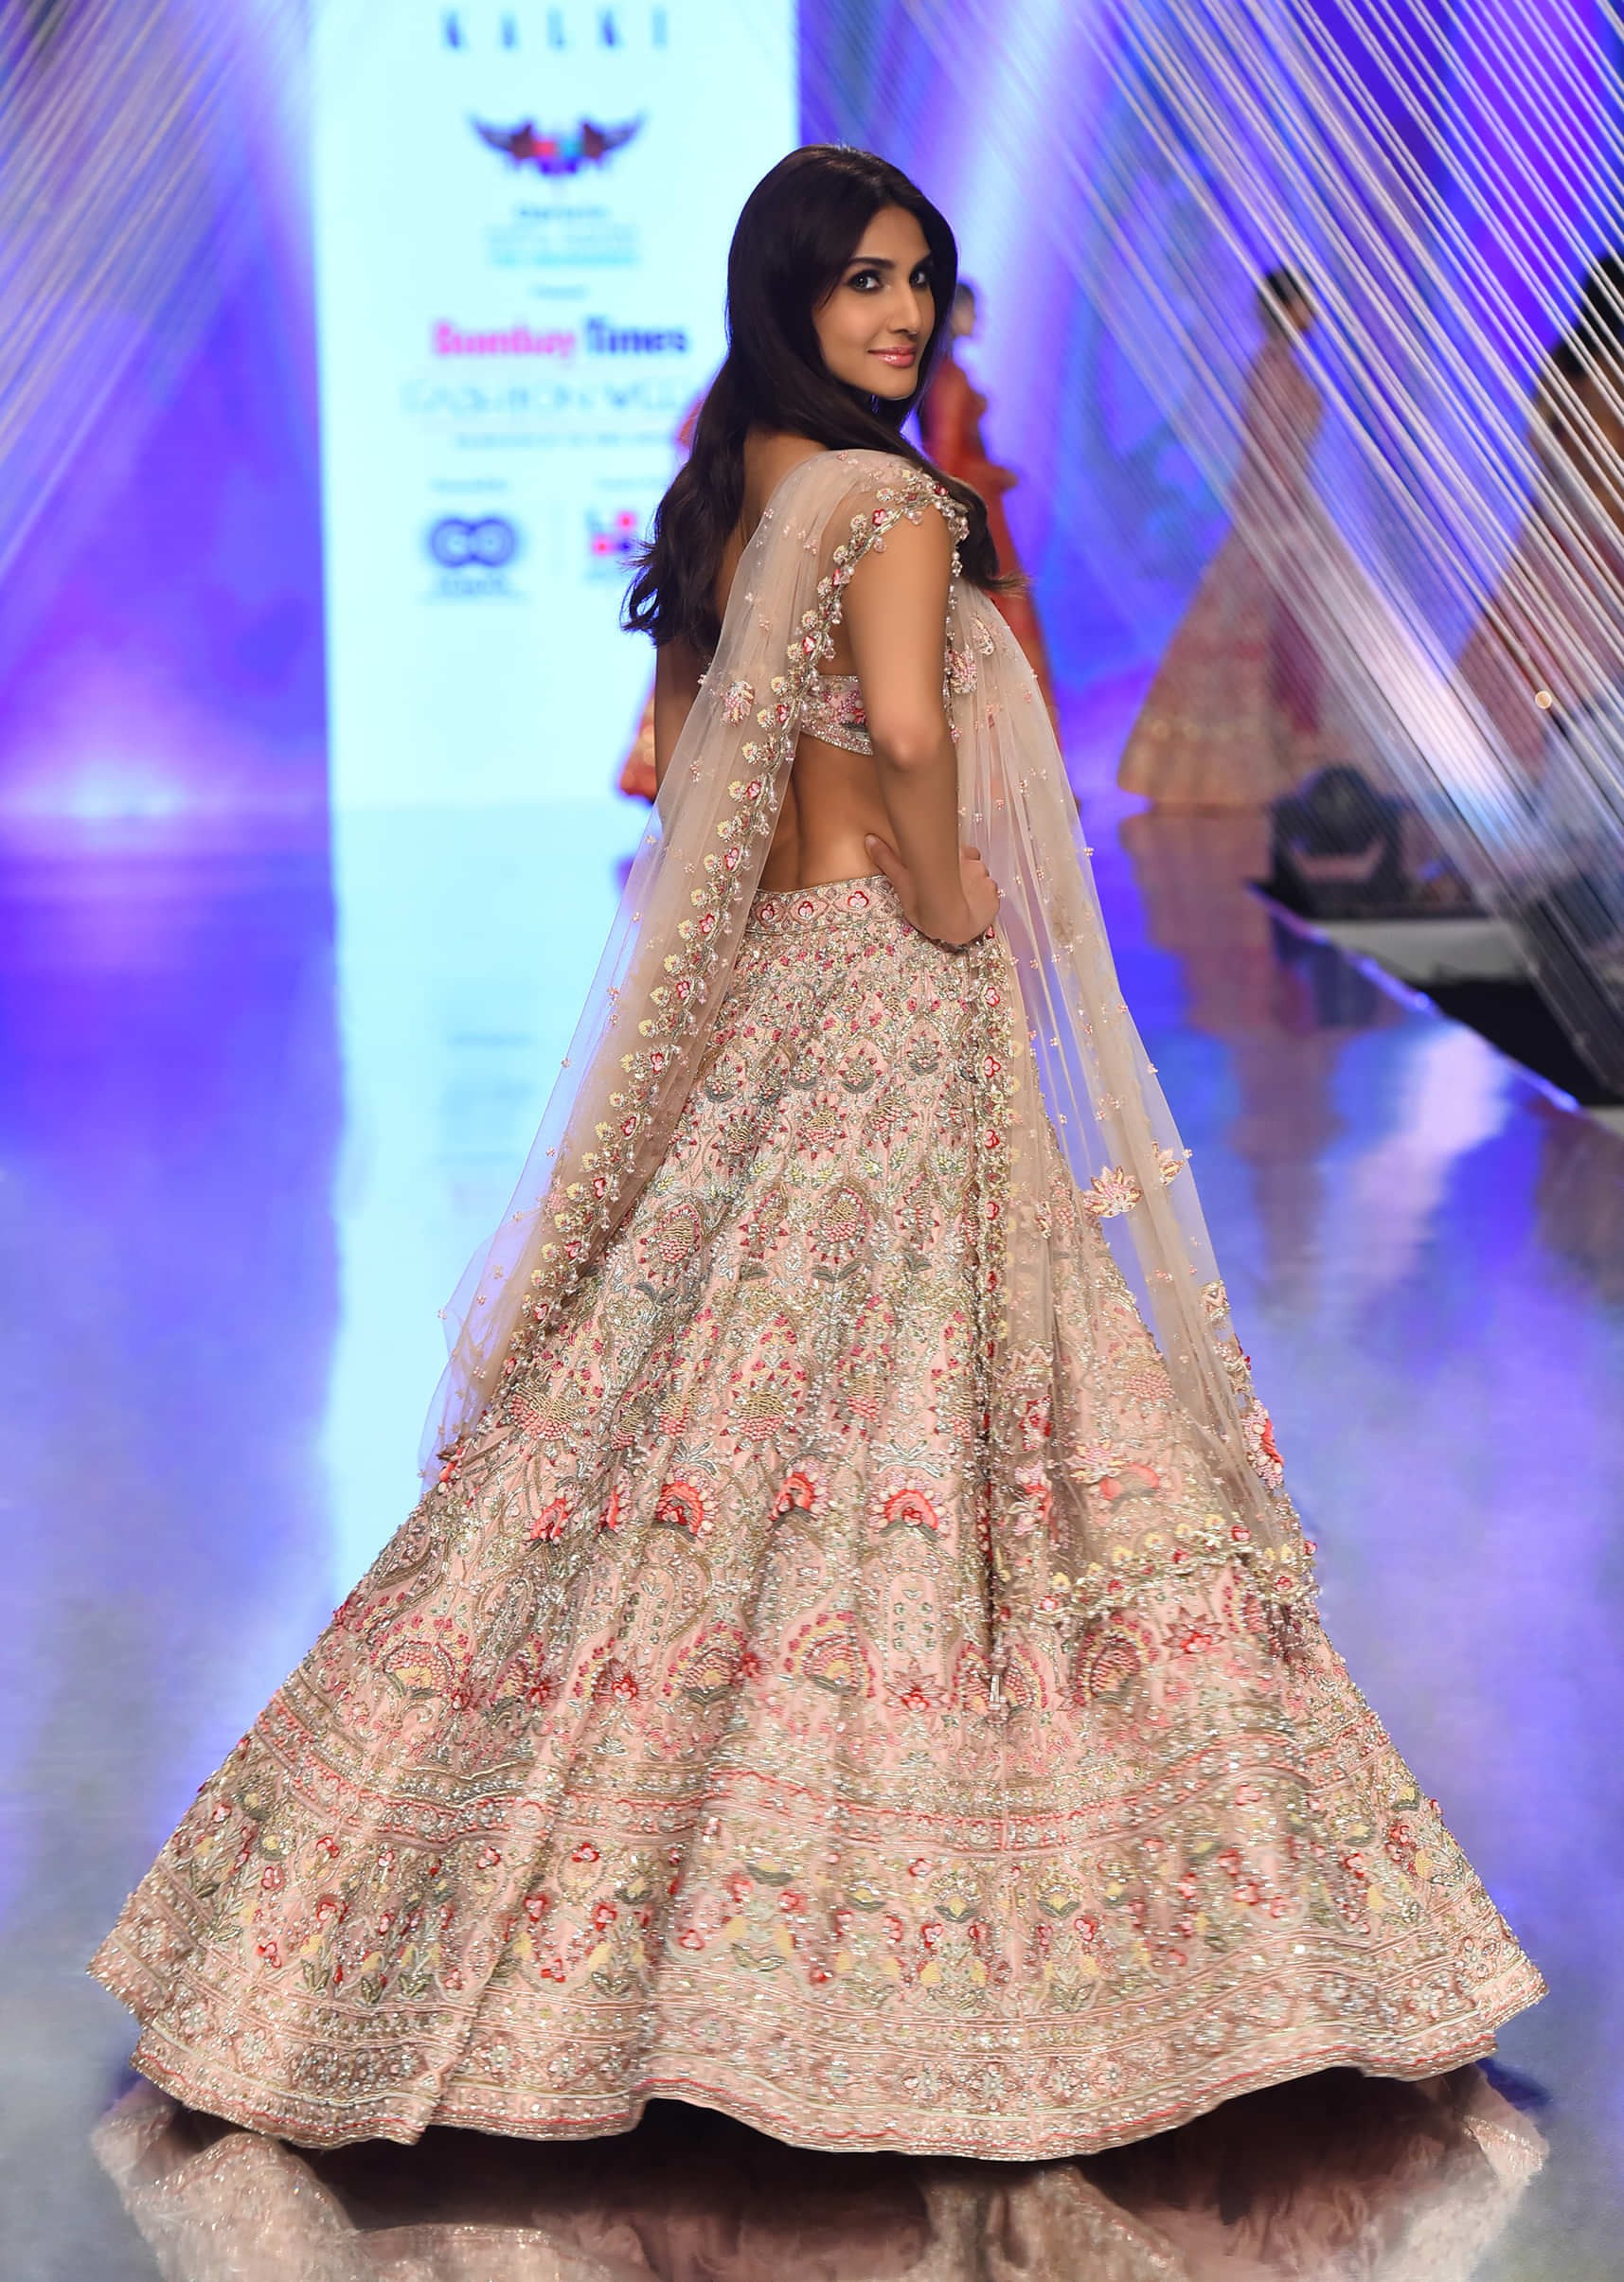 Charm Pink Rumi Lehenga Set In 3D Flower Motifs And Abla Embroidery, Crop Top Comes With The Similar Embroidery